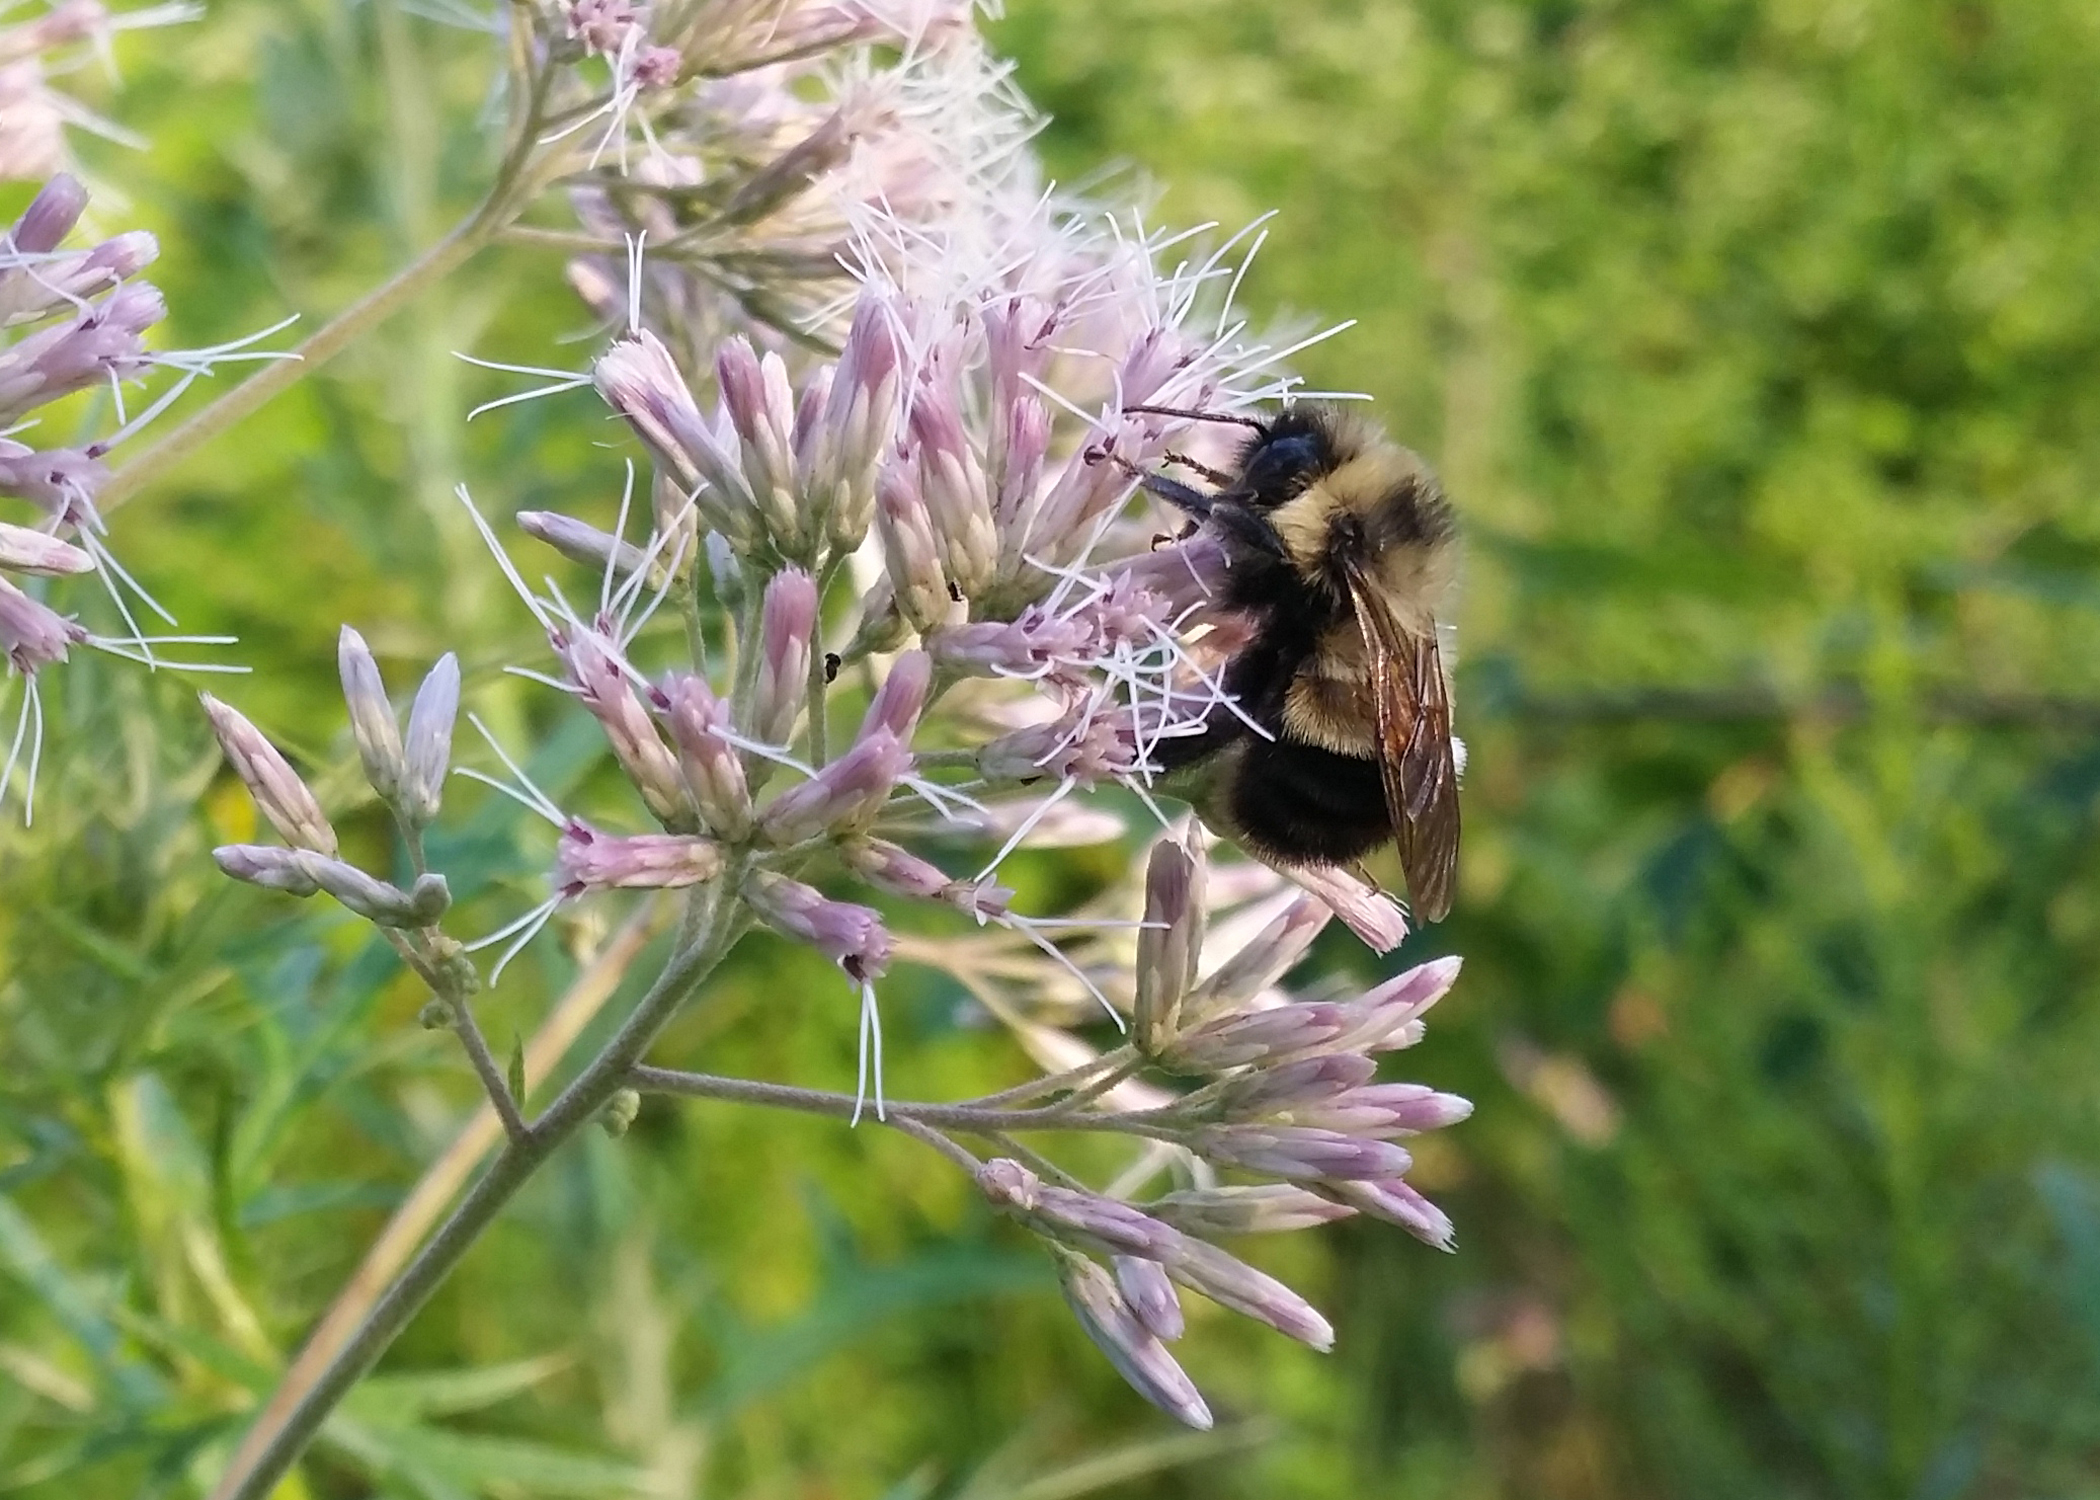 A rusty patched bumble bee is perched on the barely open blooms of a light-purple flower.